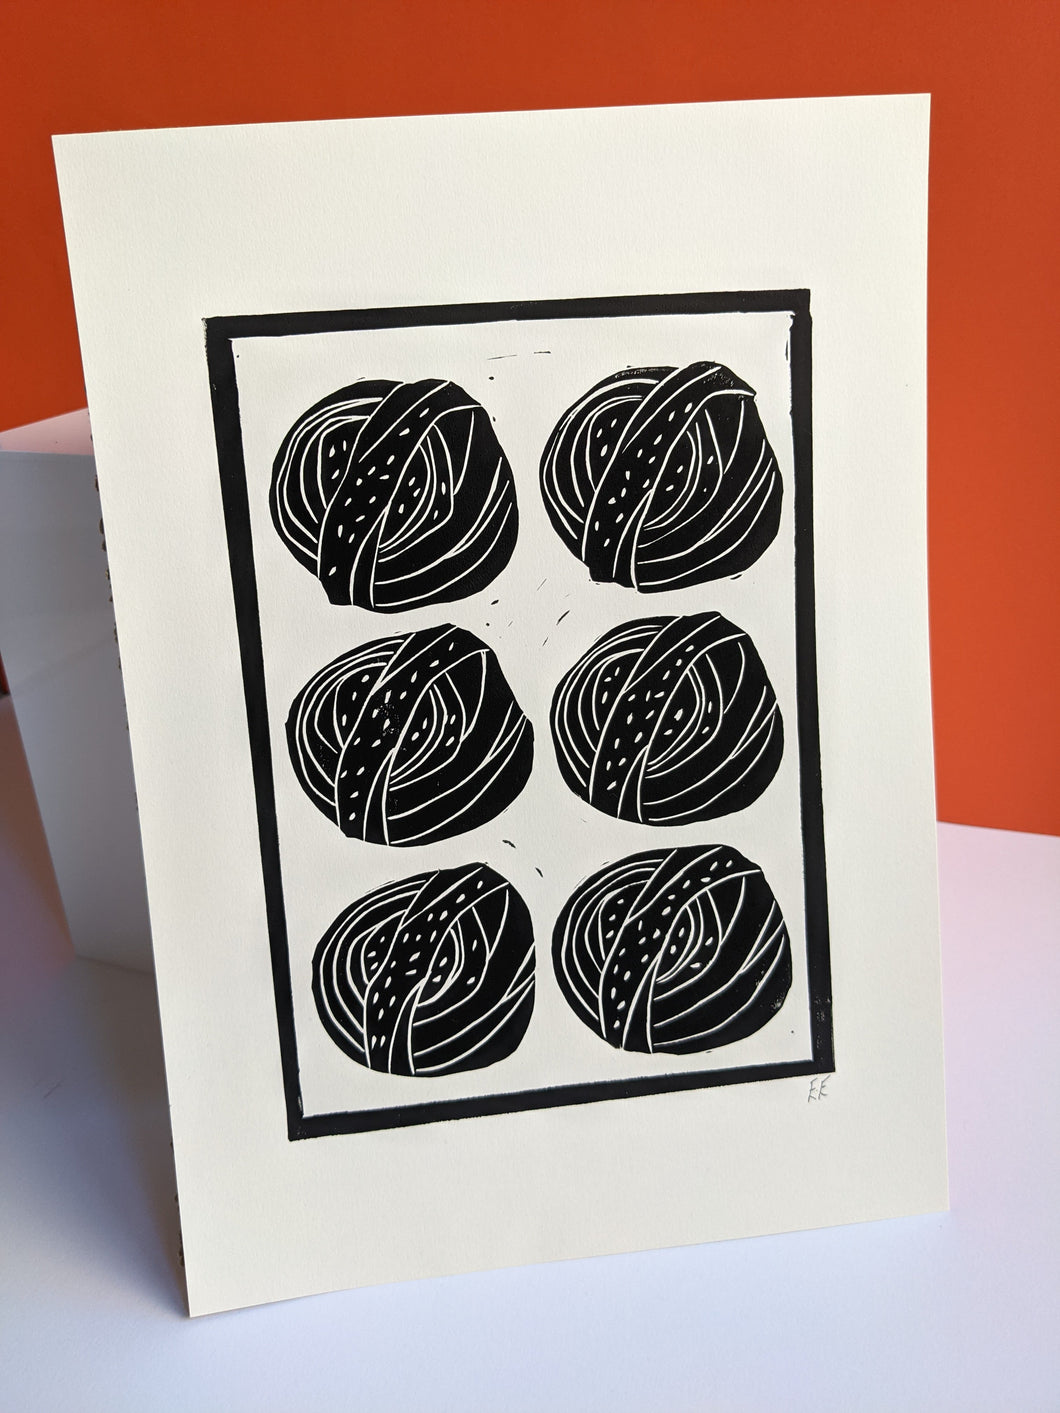 A black and white print of six cinnamon buns against an orange background